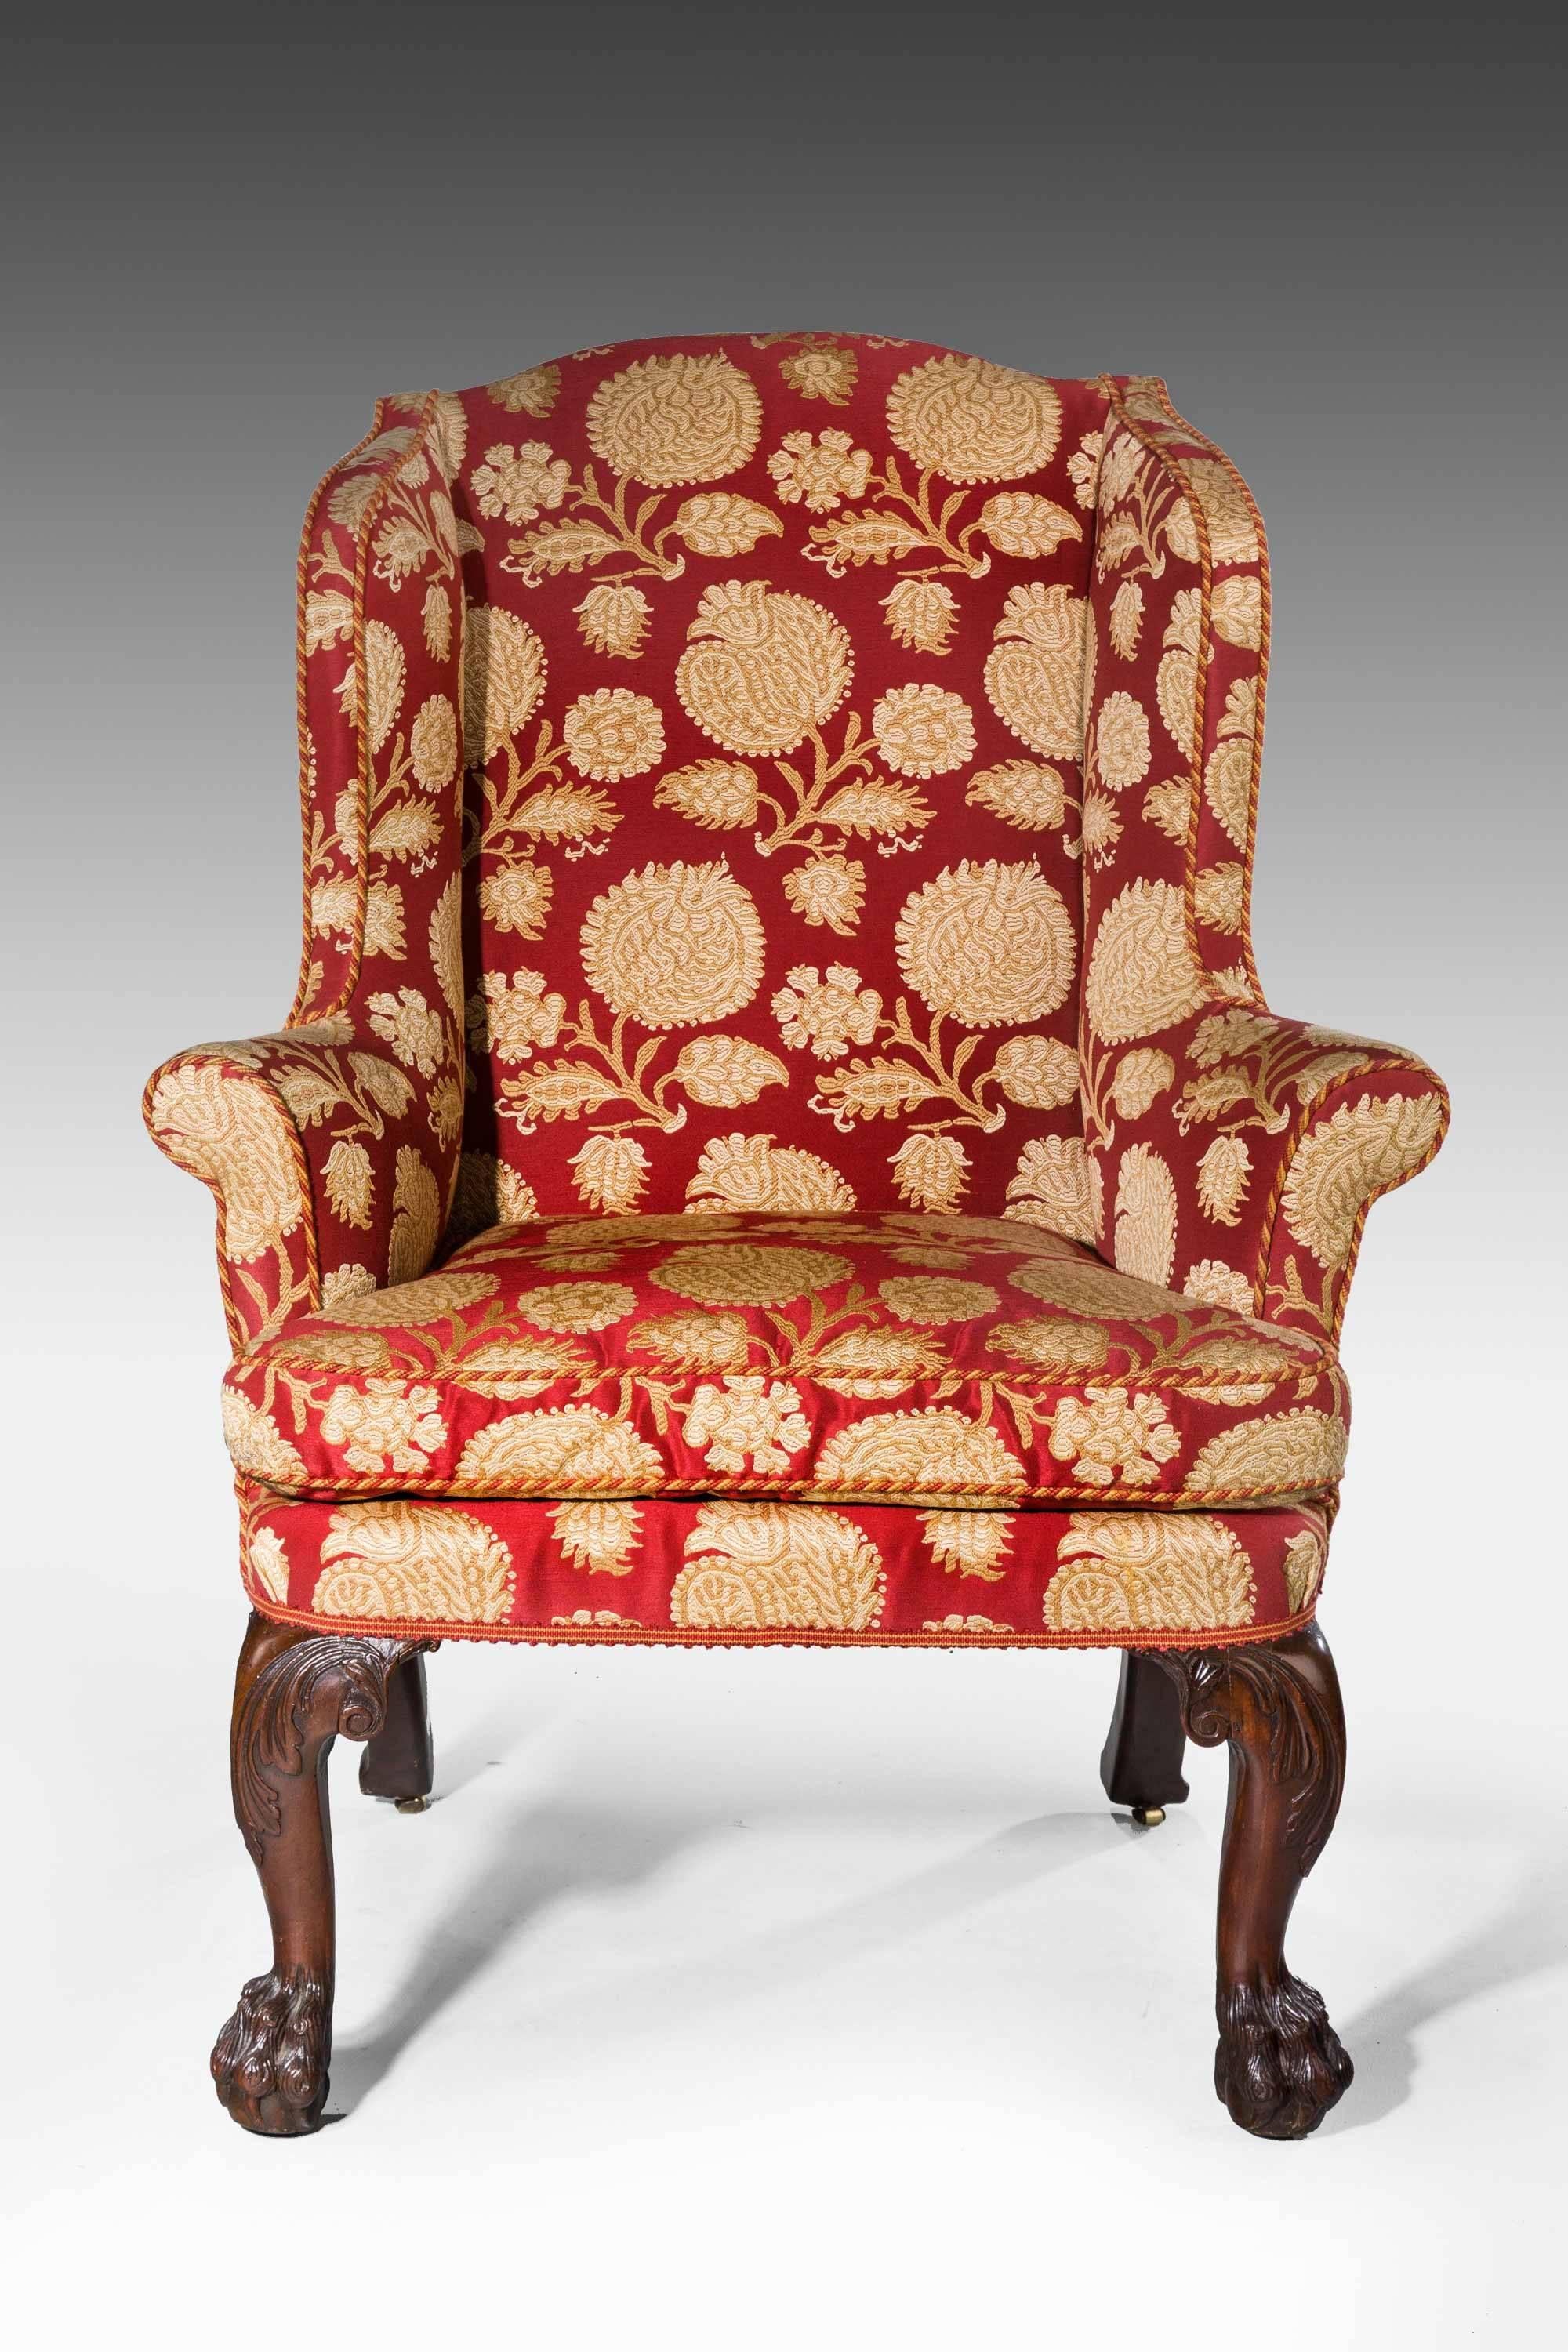 George II period wing chair of good proportions, cabriole supports with scroll work to upper section. Walnut.